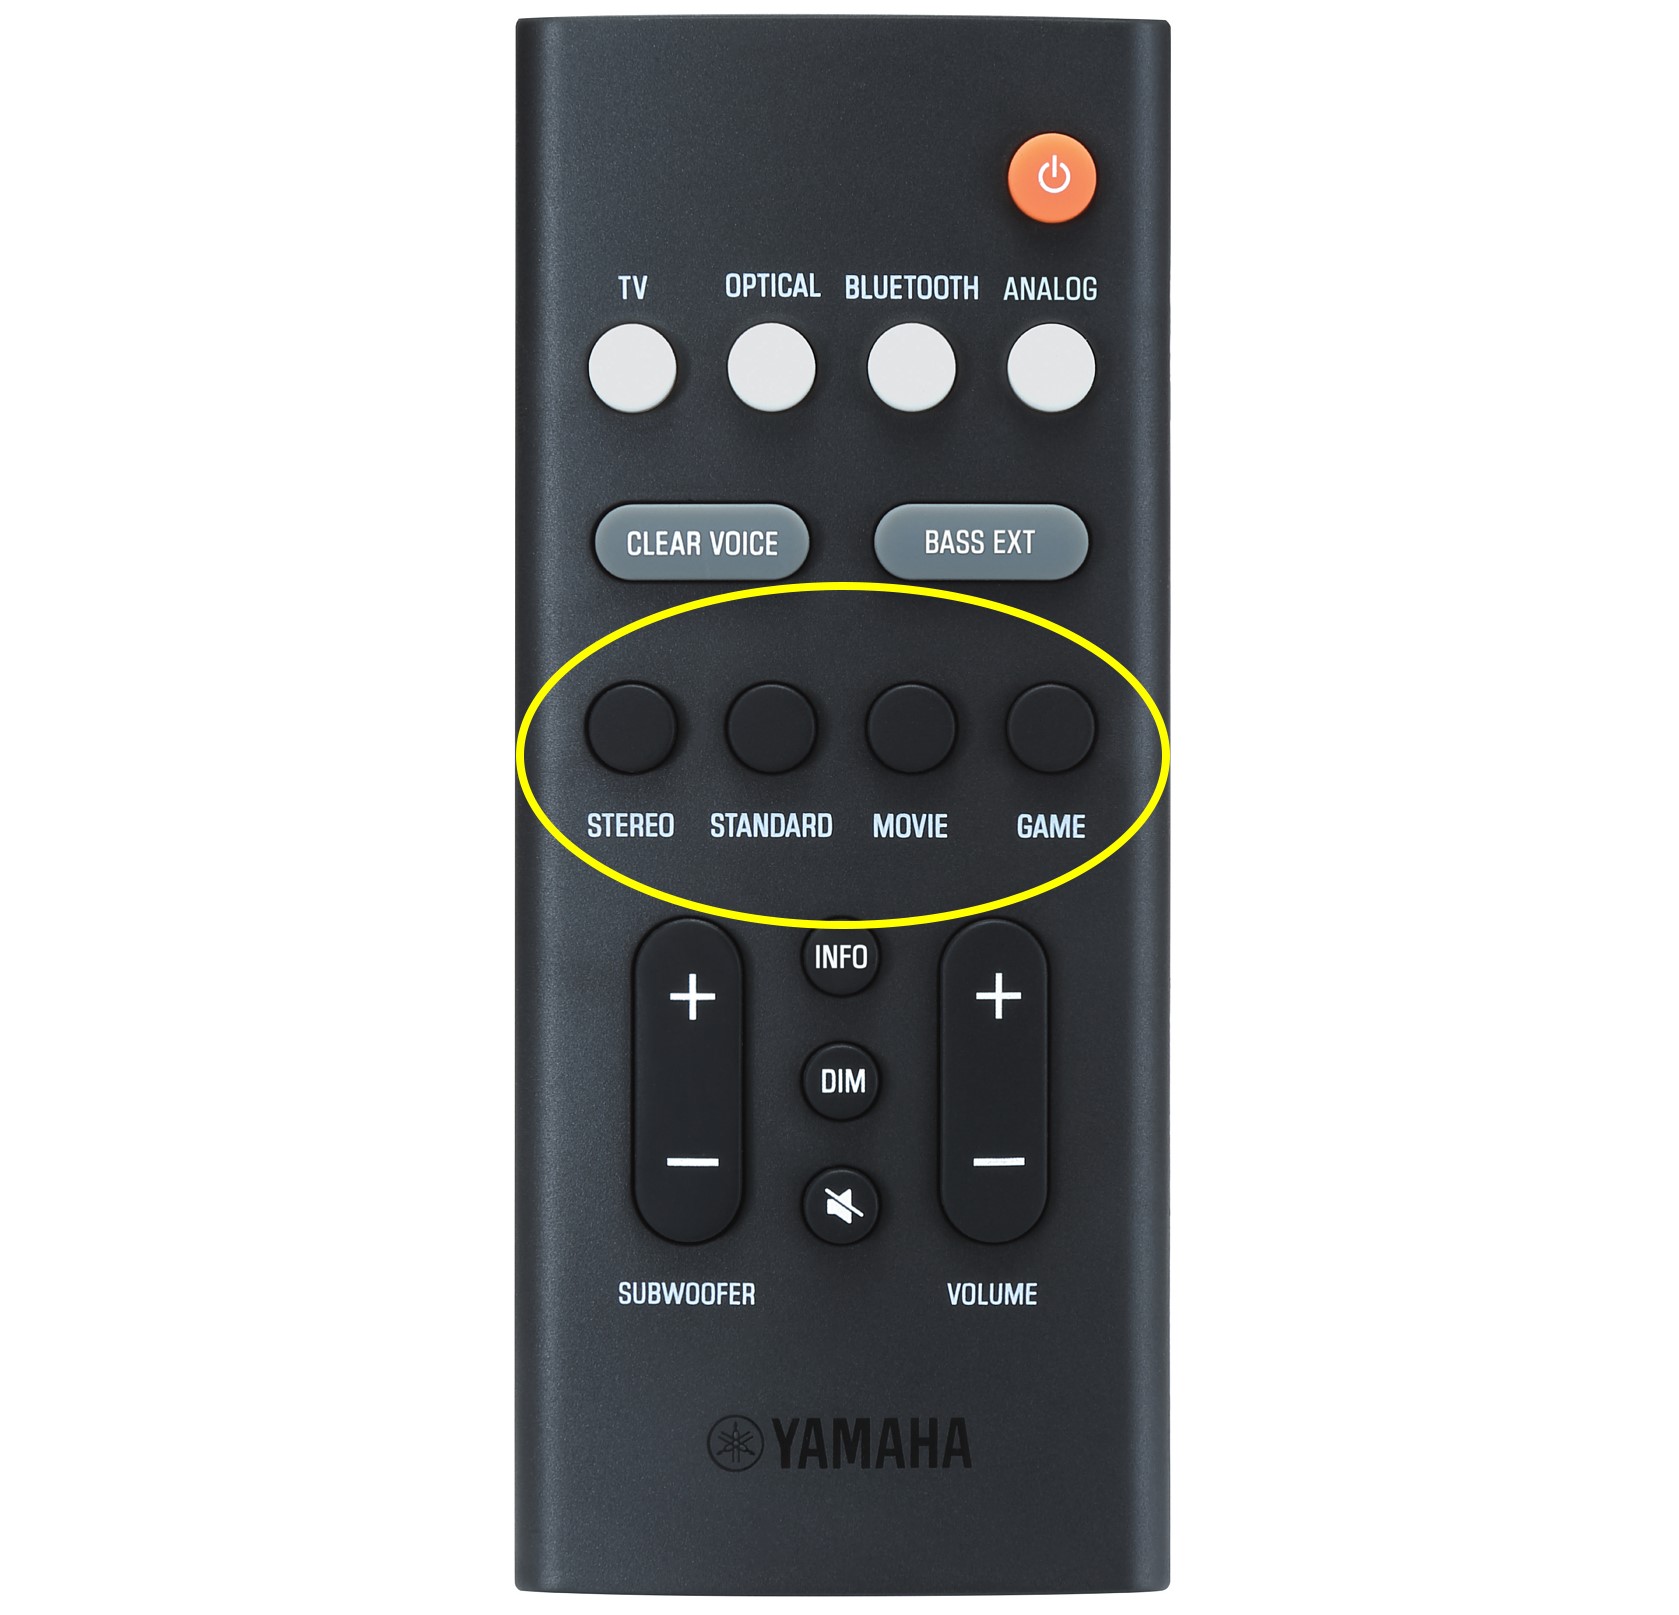 Remote control with buttons circled